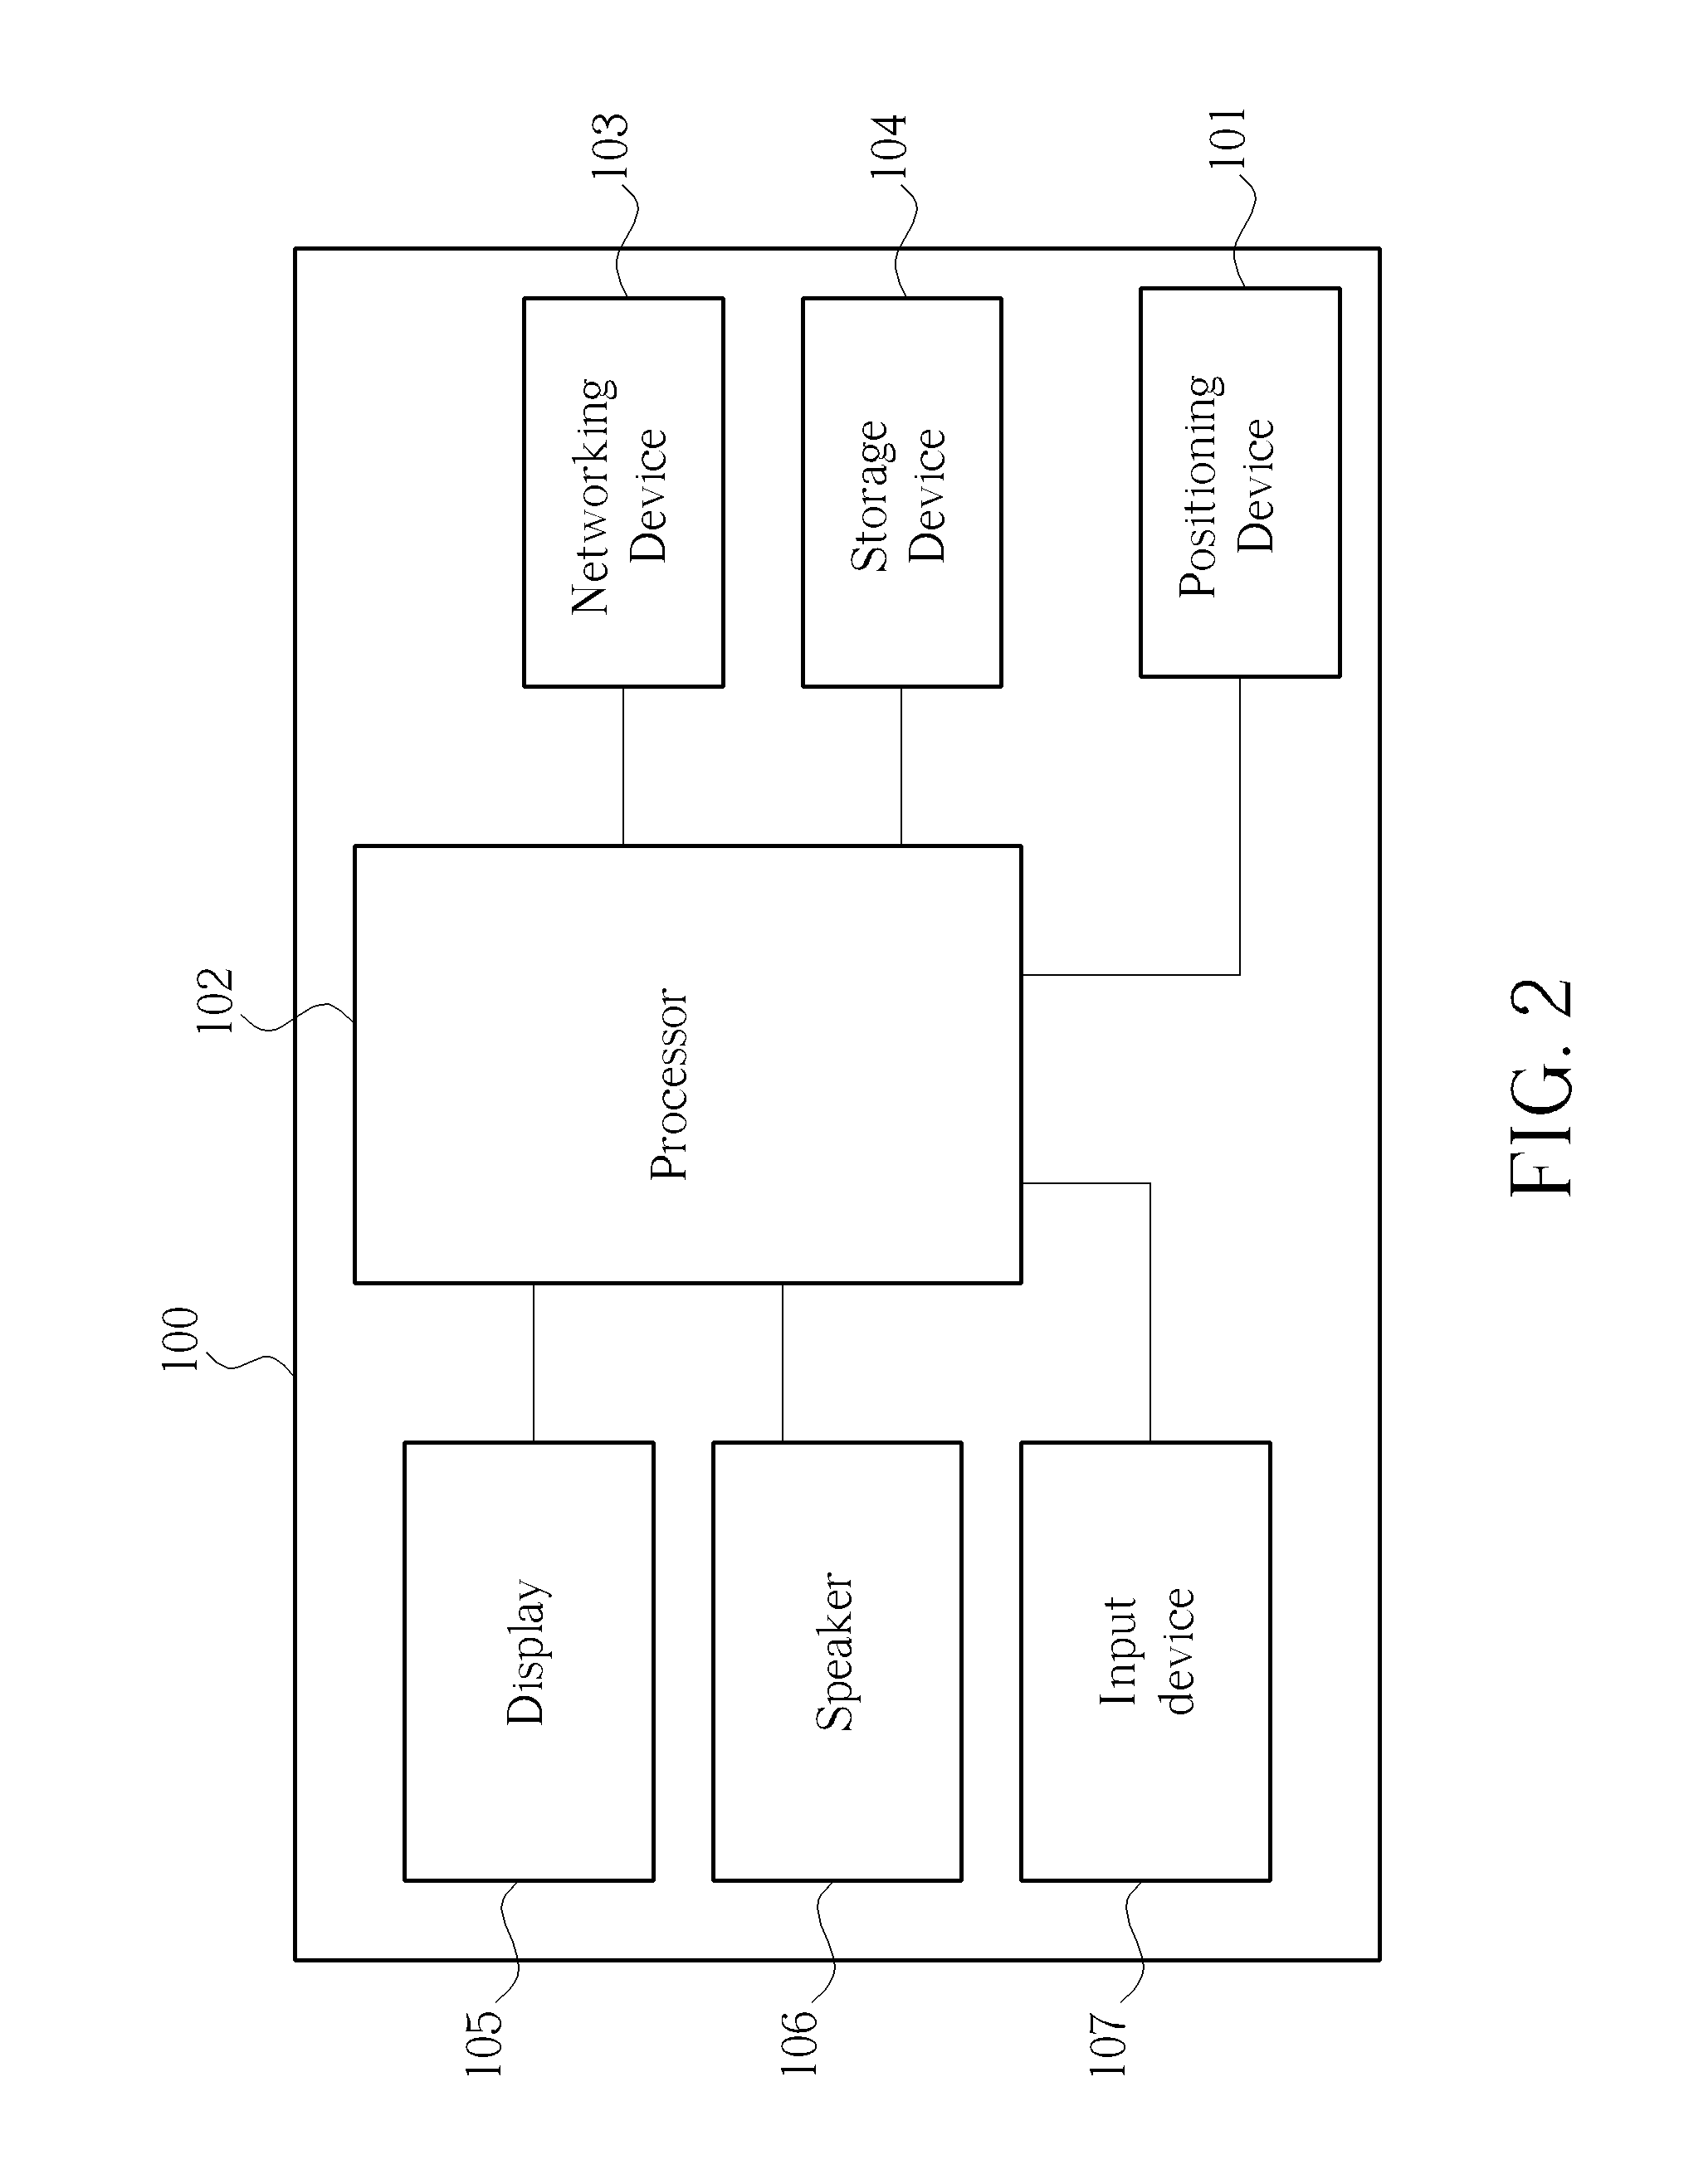 Method of providing crime-related safety information to a user of a personal navigation device and related device